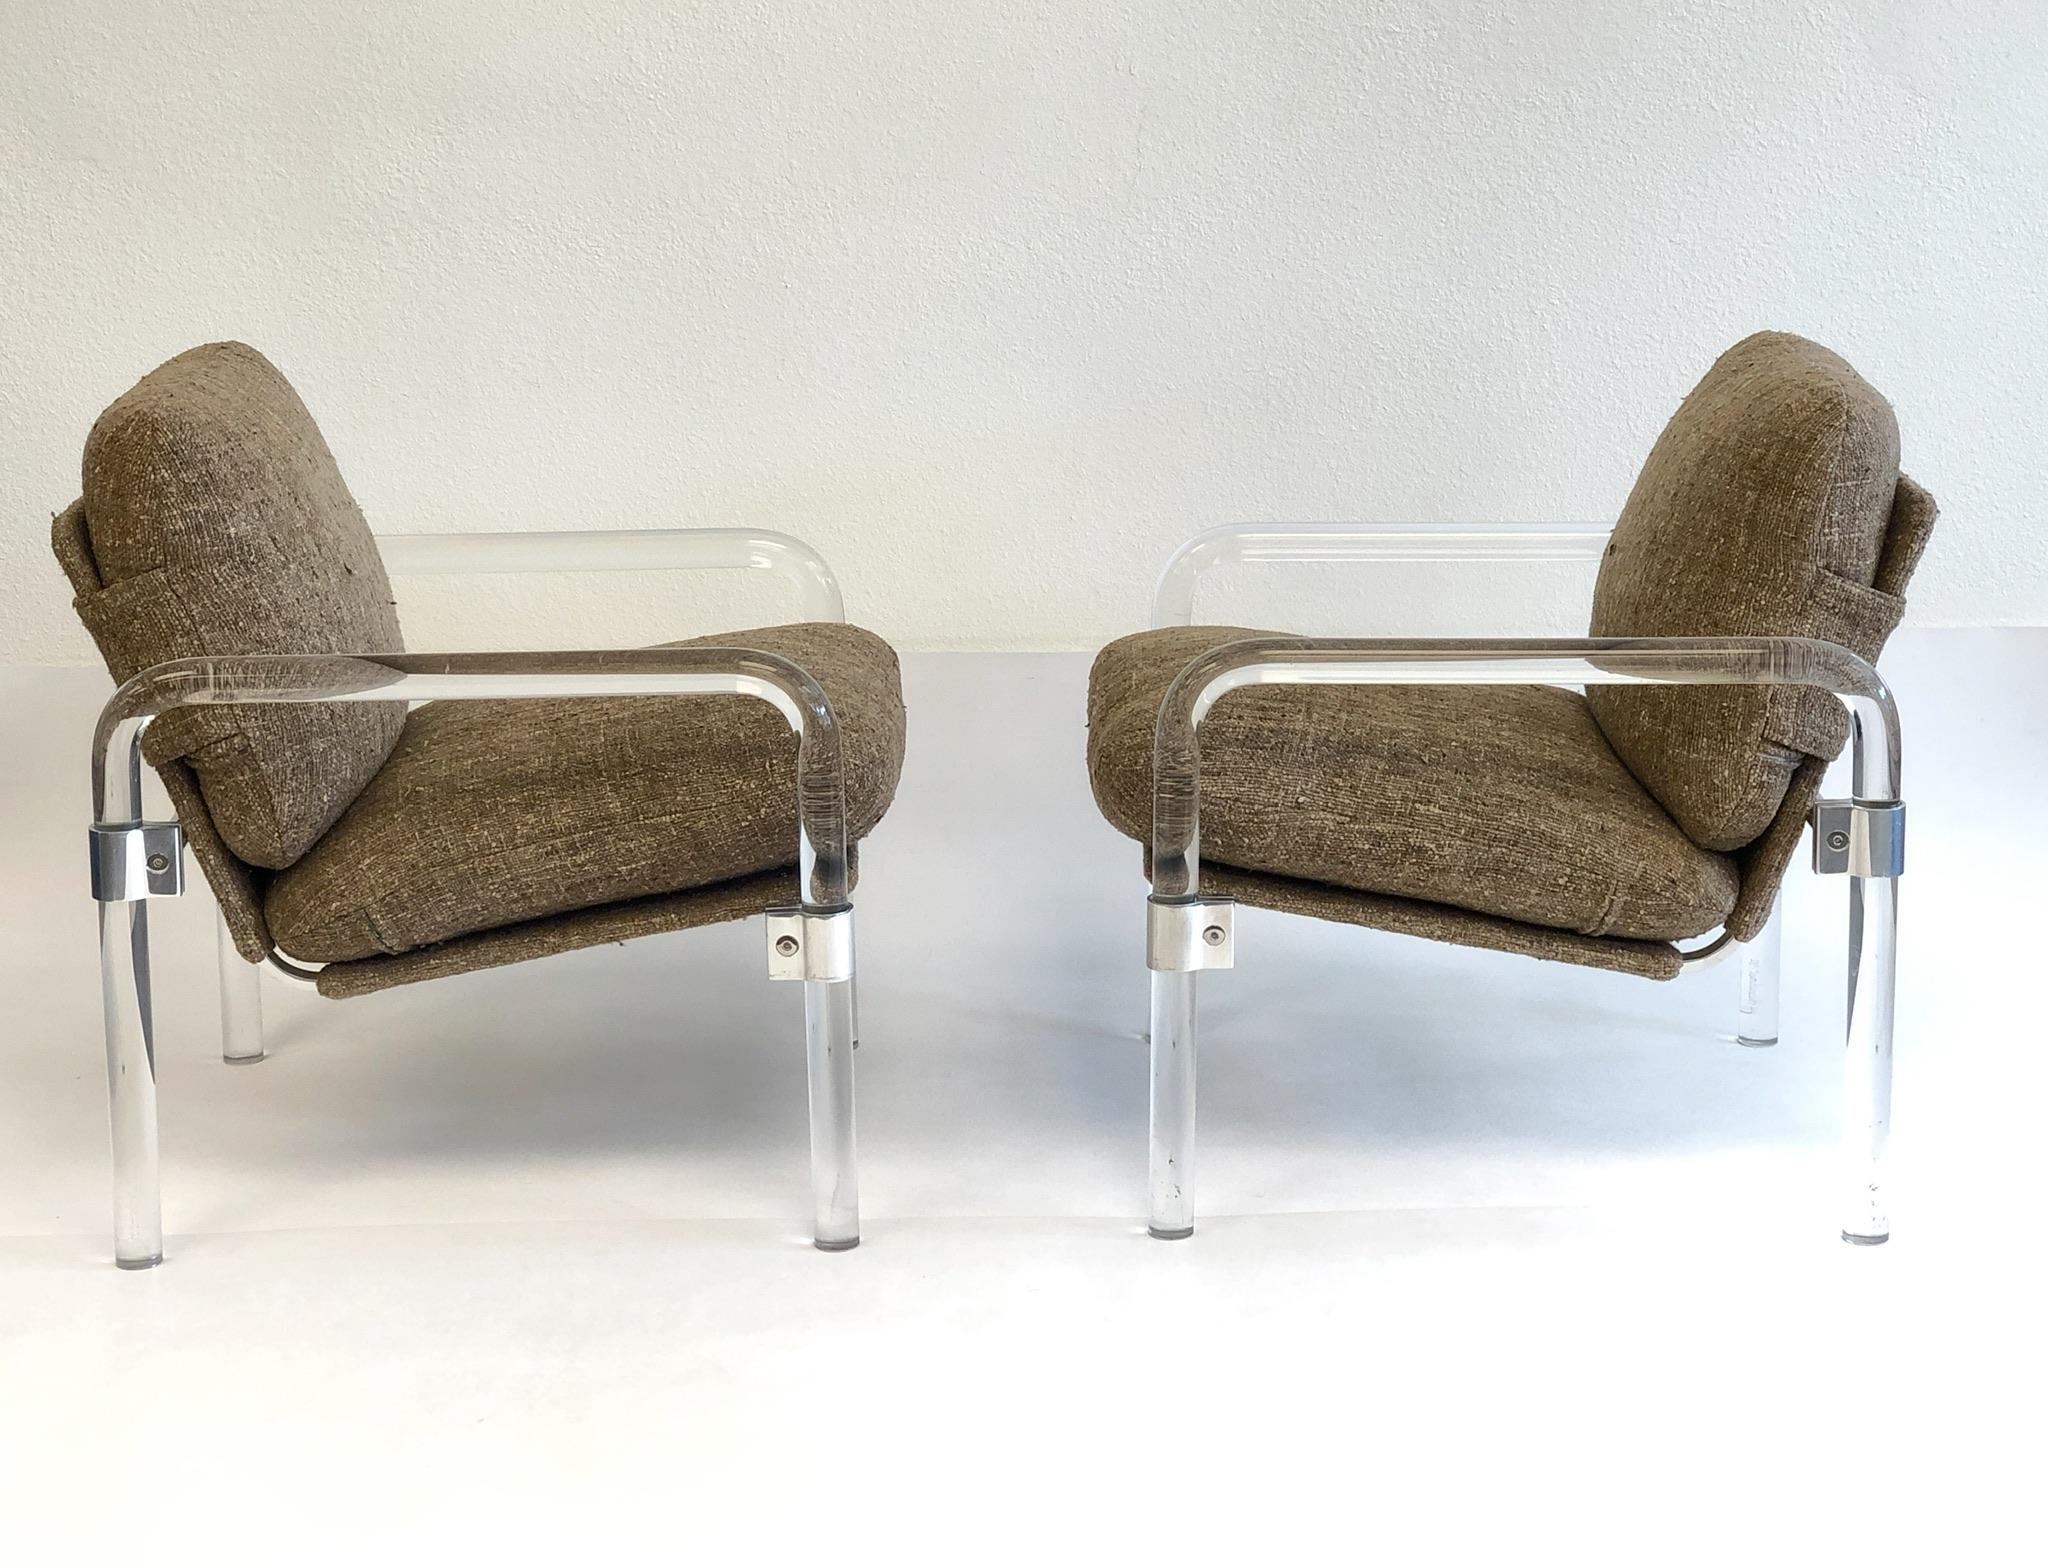 A glamorous pair of clear acrylic and polish chrome “Pipe Line Series 2” lounge chairs by Jeff Messerschmidt. Both chairs are signed, numbered(#162, #163) and dated 1982.
The chairs retain original light brown fabric upholstered by a Palm Desert